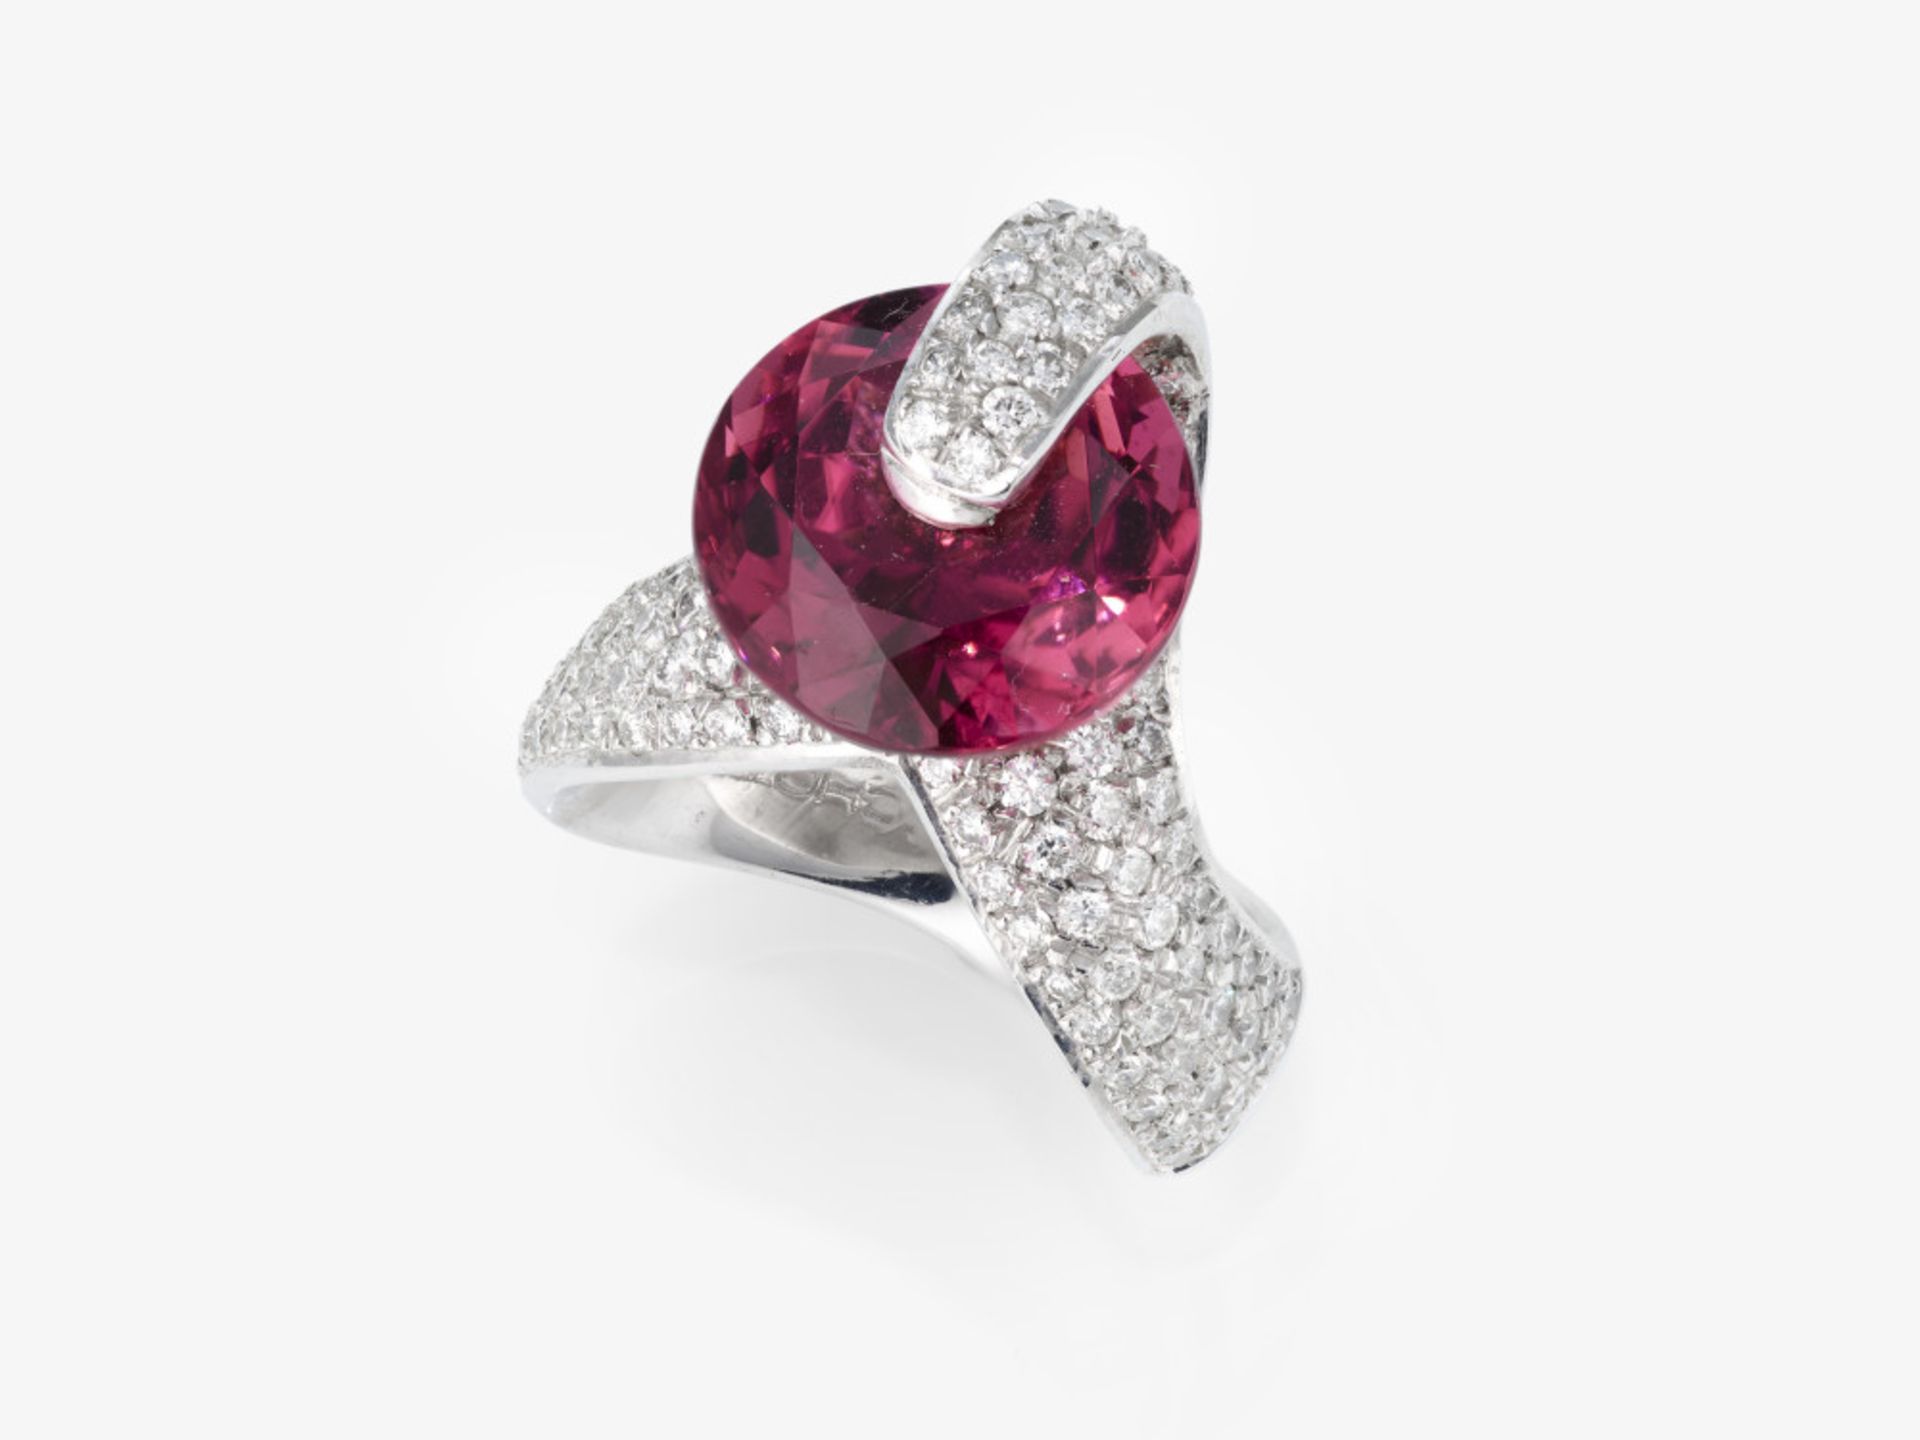 A ring with rubellite and brilliant-cut diamonds - Nuremberg, Juwelier SCHOTT - Image 2 of 3